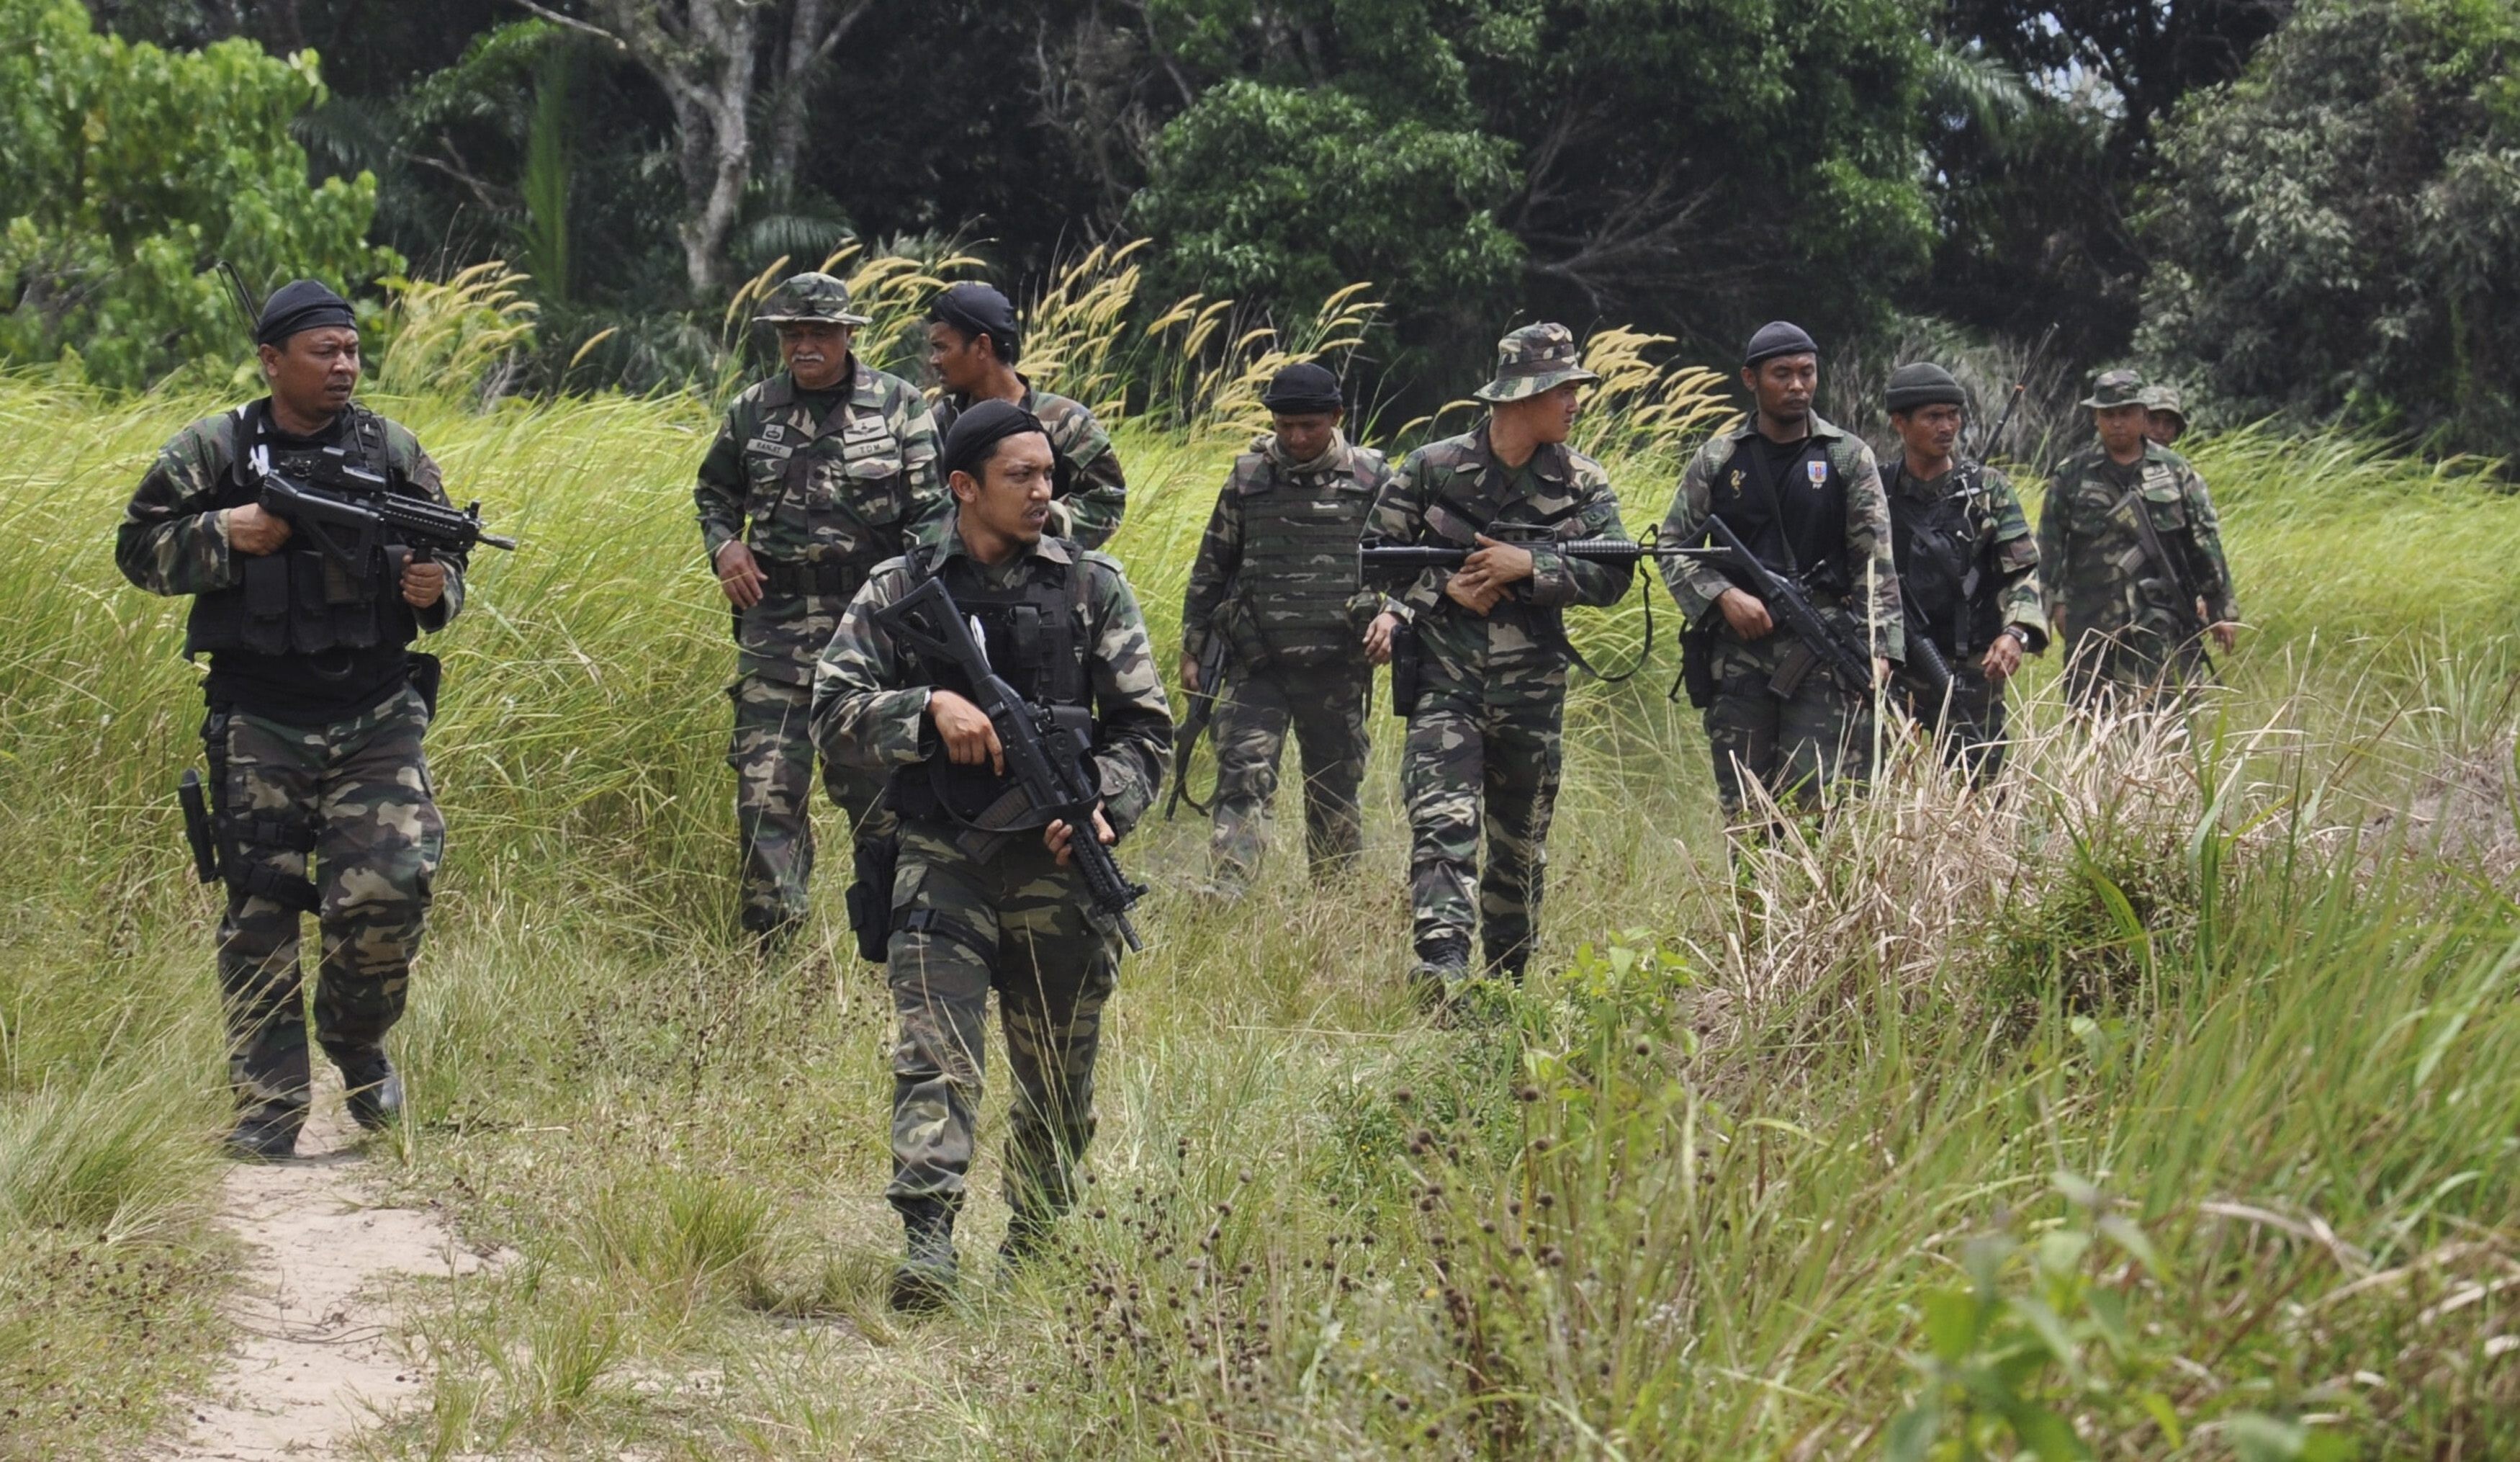 Malaysian soldiers seen on patrol during an operation in Sabah state. Photo: Handout via EPA